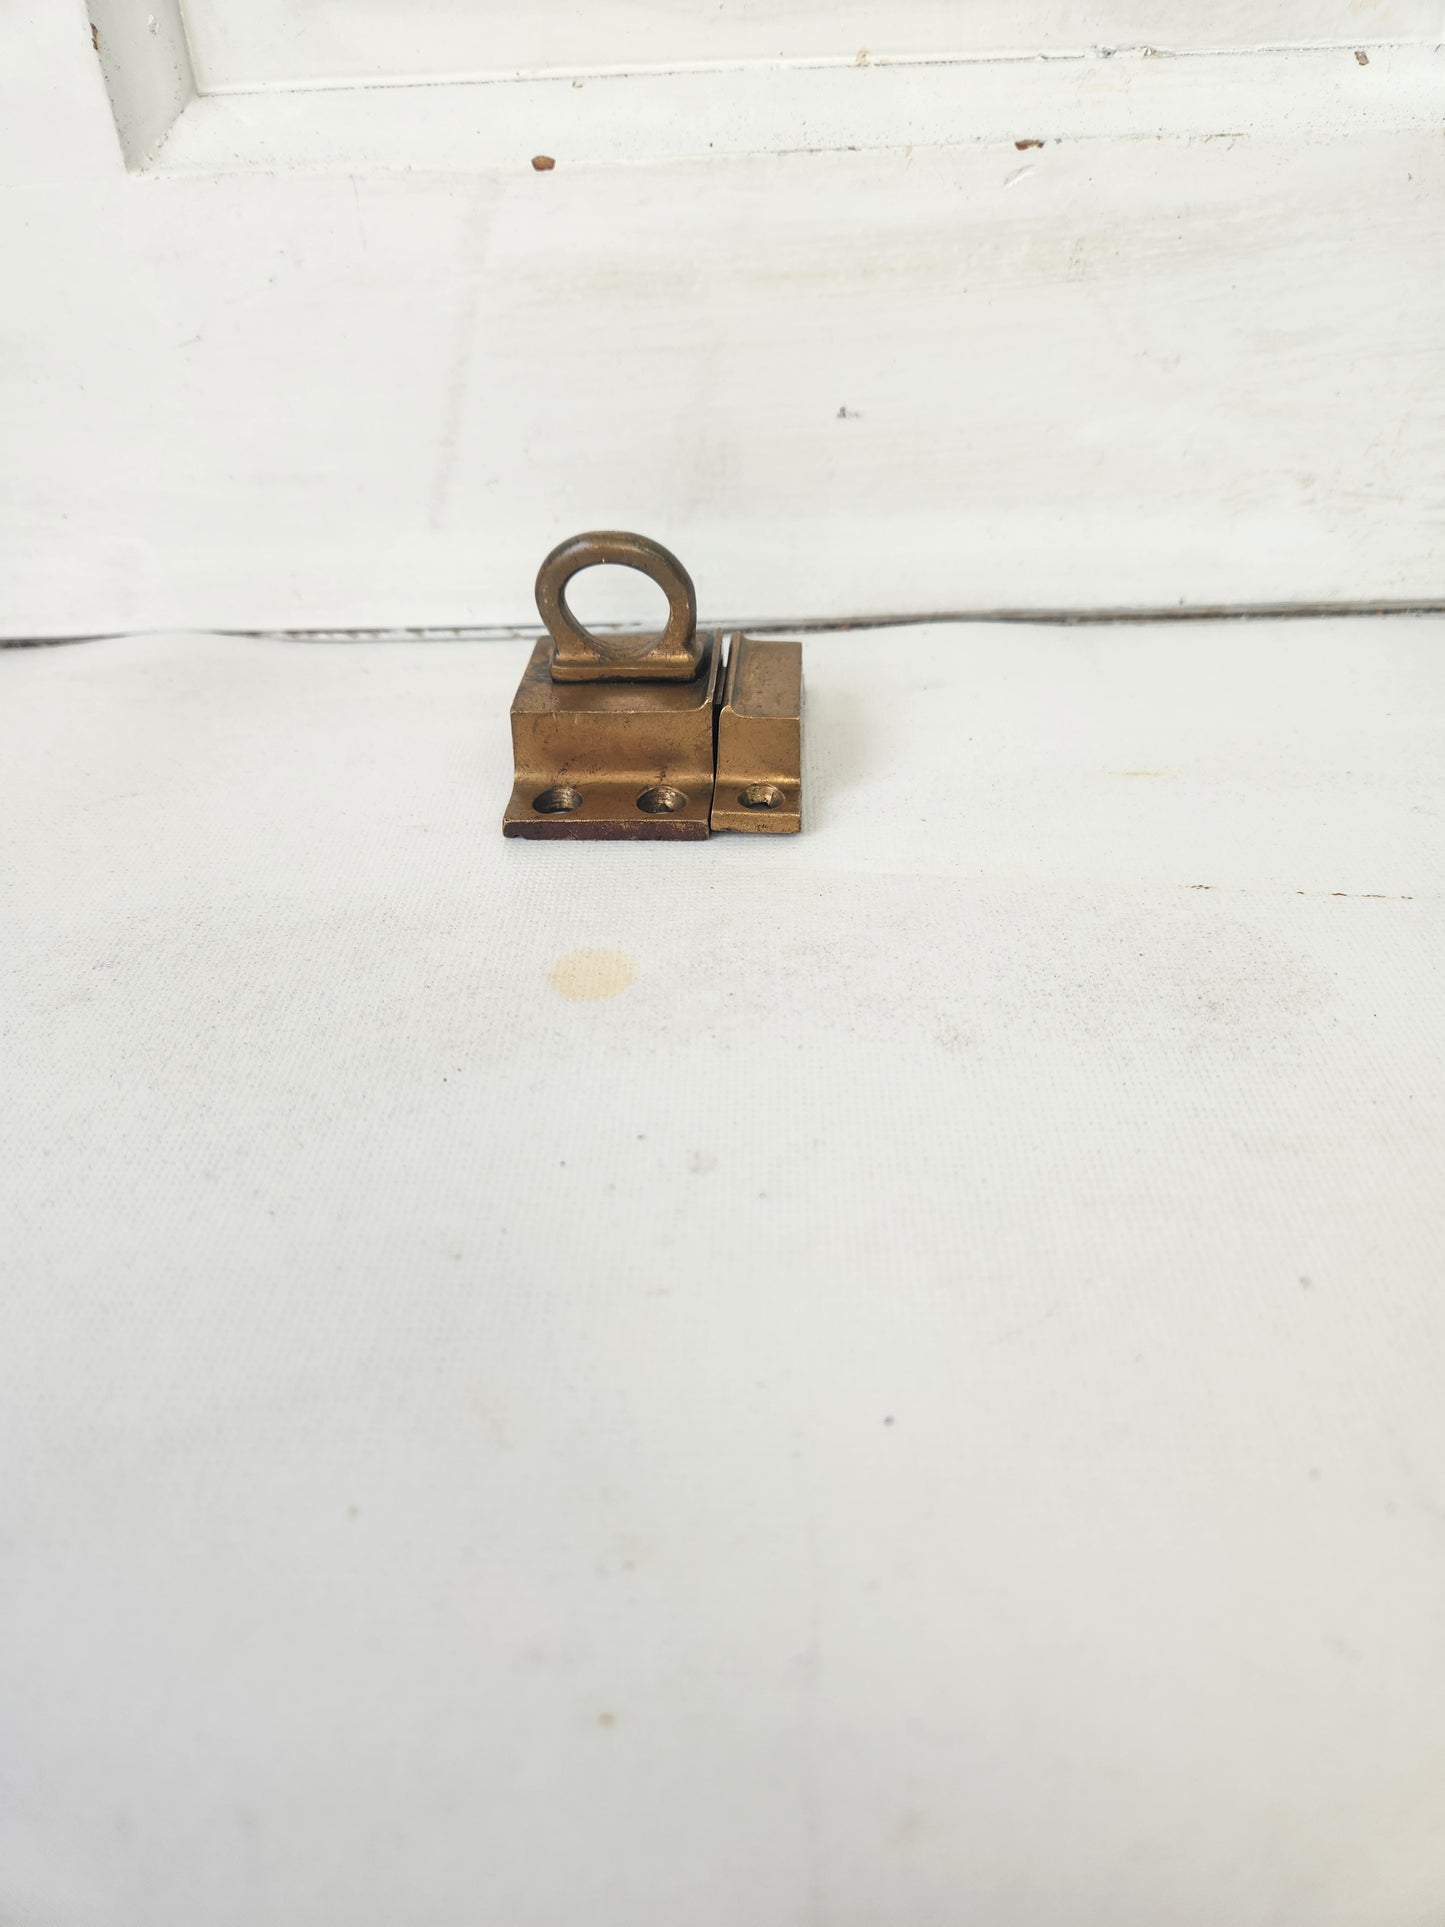 Solid Bronze Transom Latch or Brass Lock, Cabinet Hardware, Vintage Lock and Keeper Cupboard Latch 122109